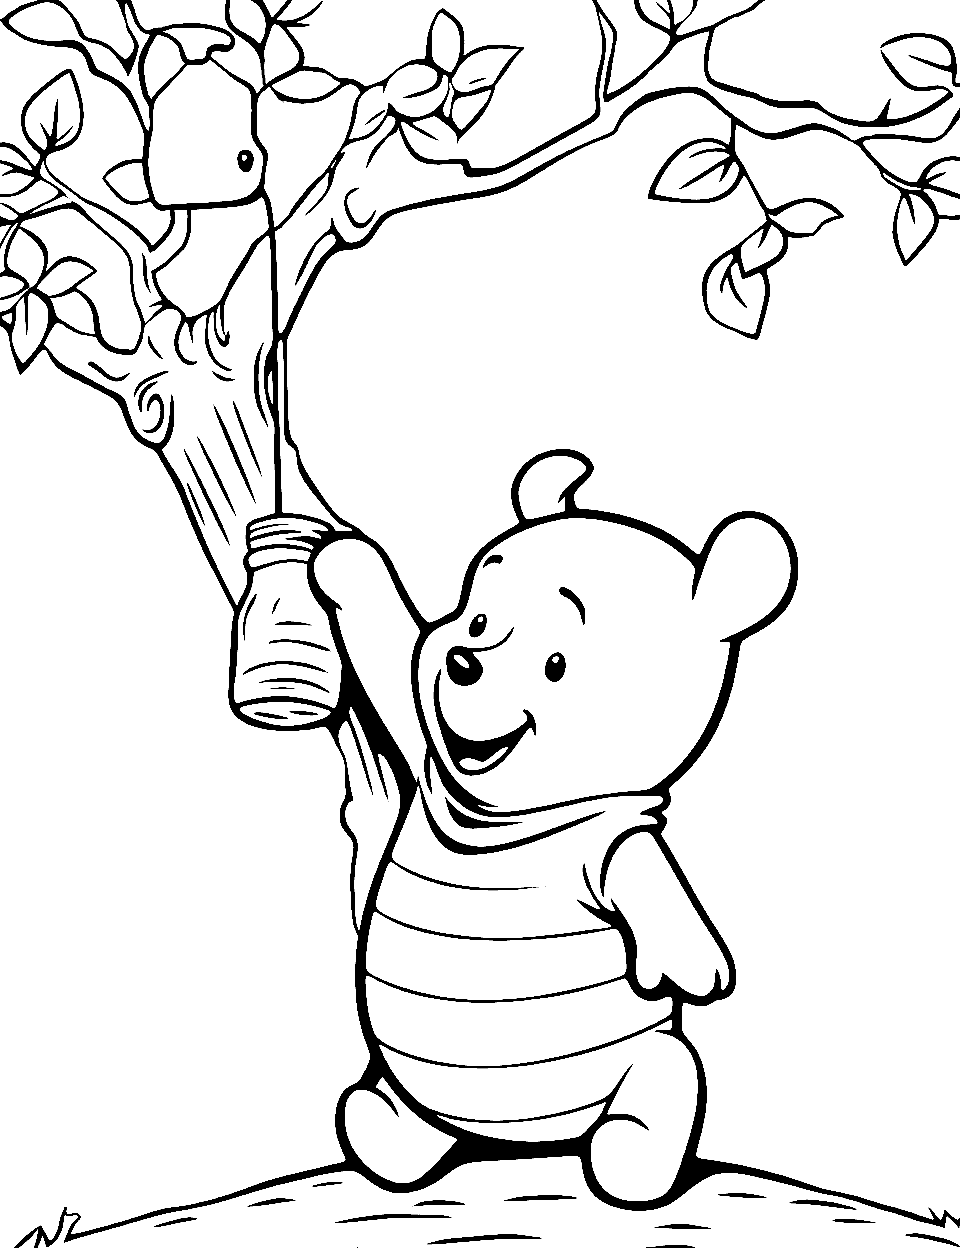 winnie the pooh! drawing by Le-Galerien-Art on DeviantArt